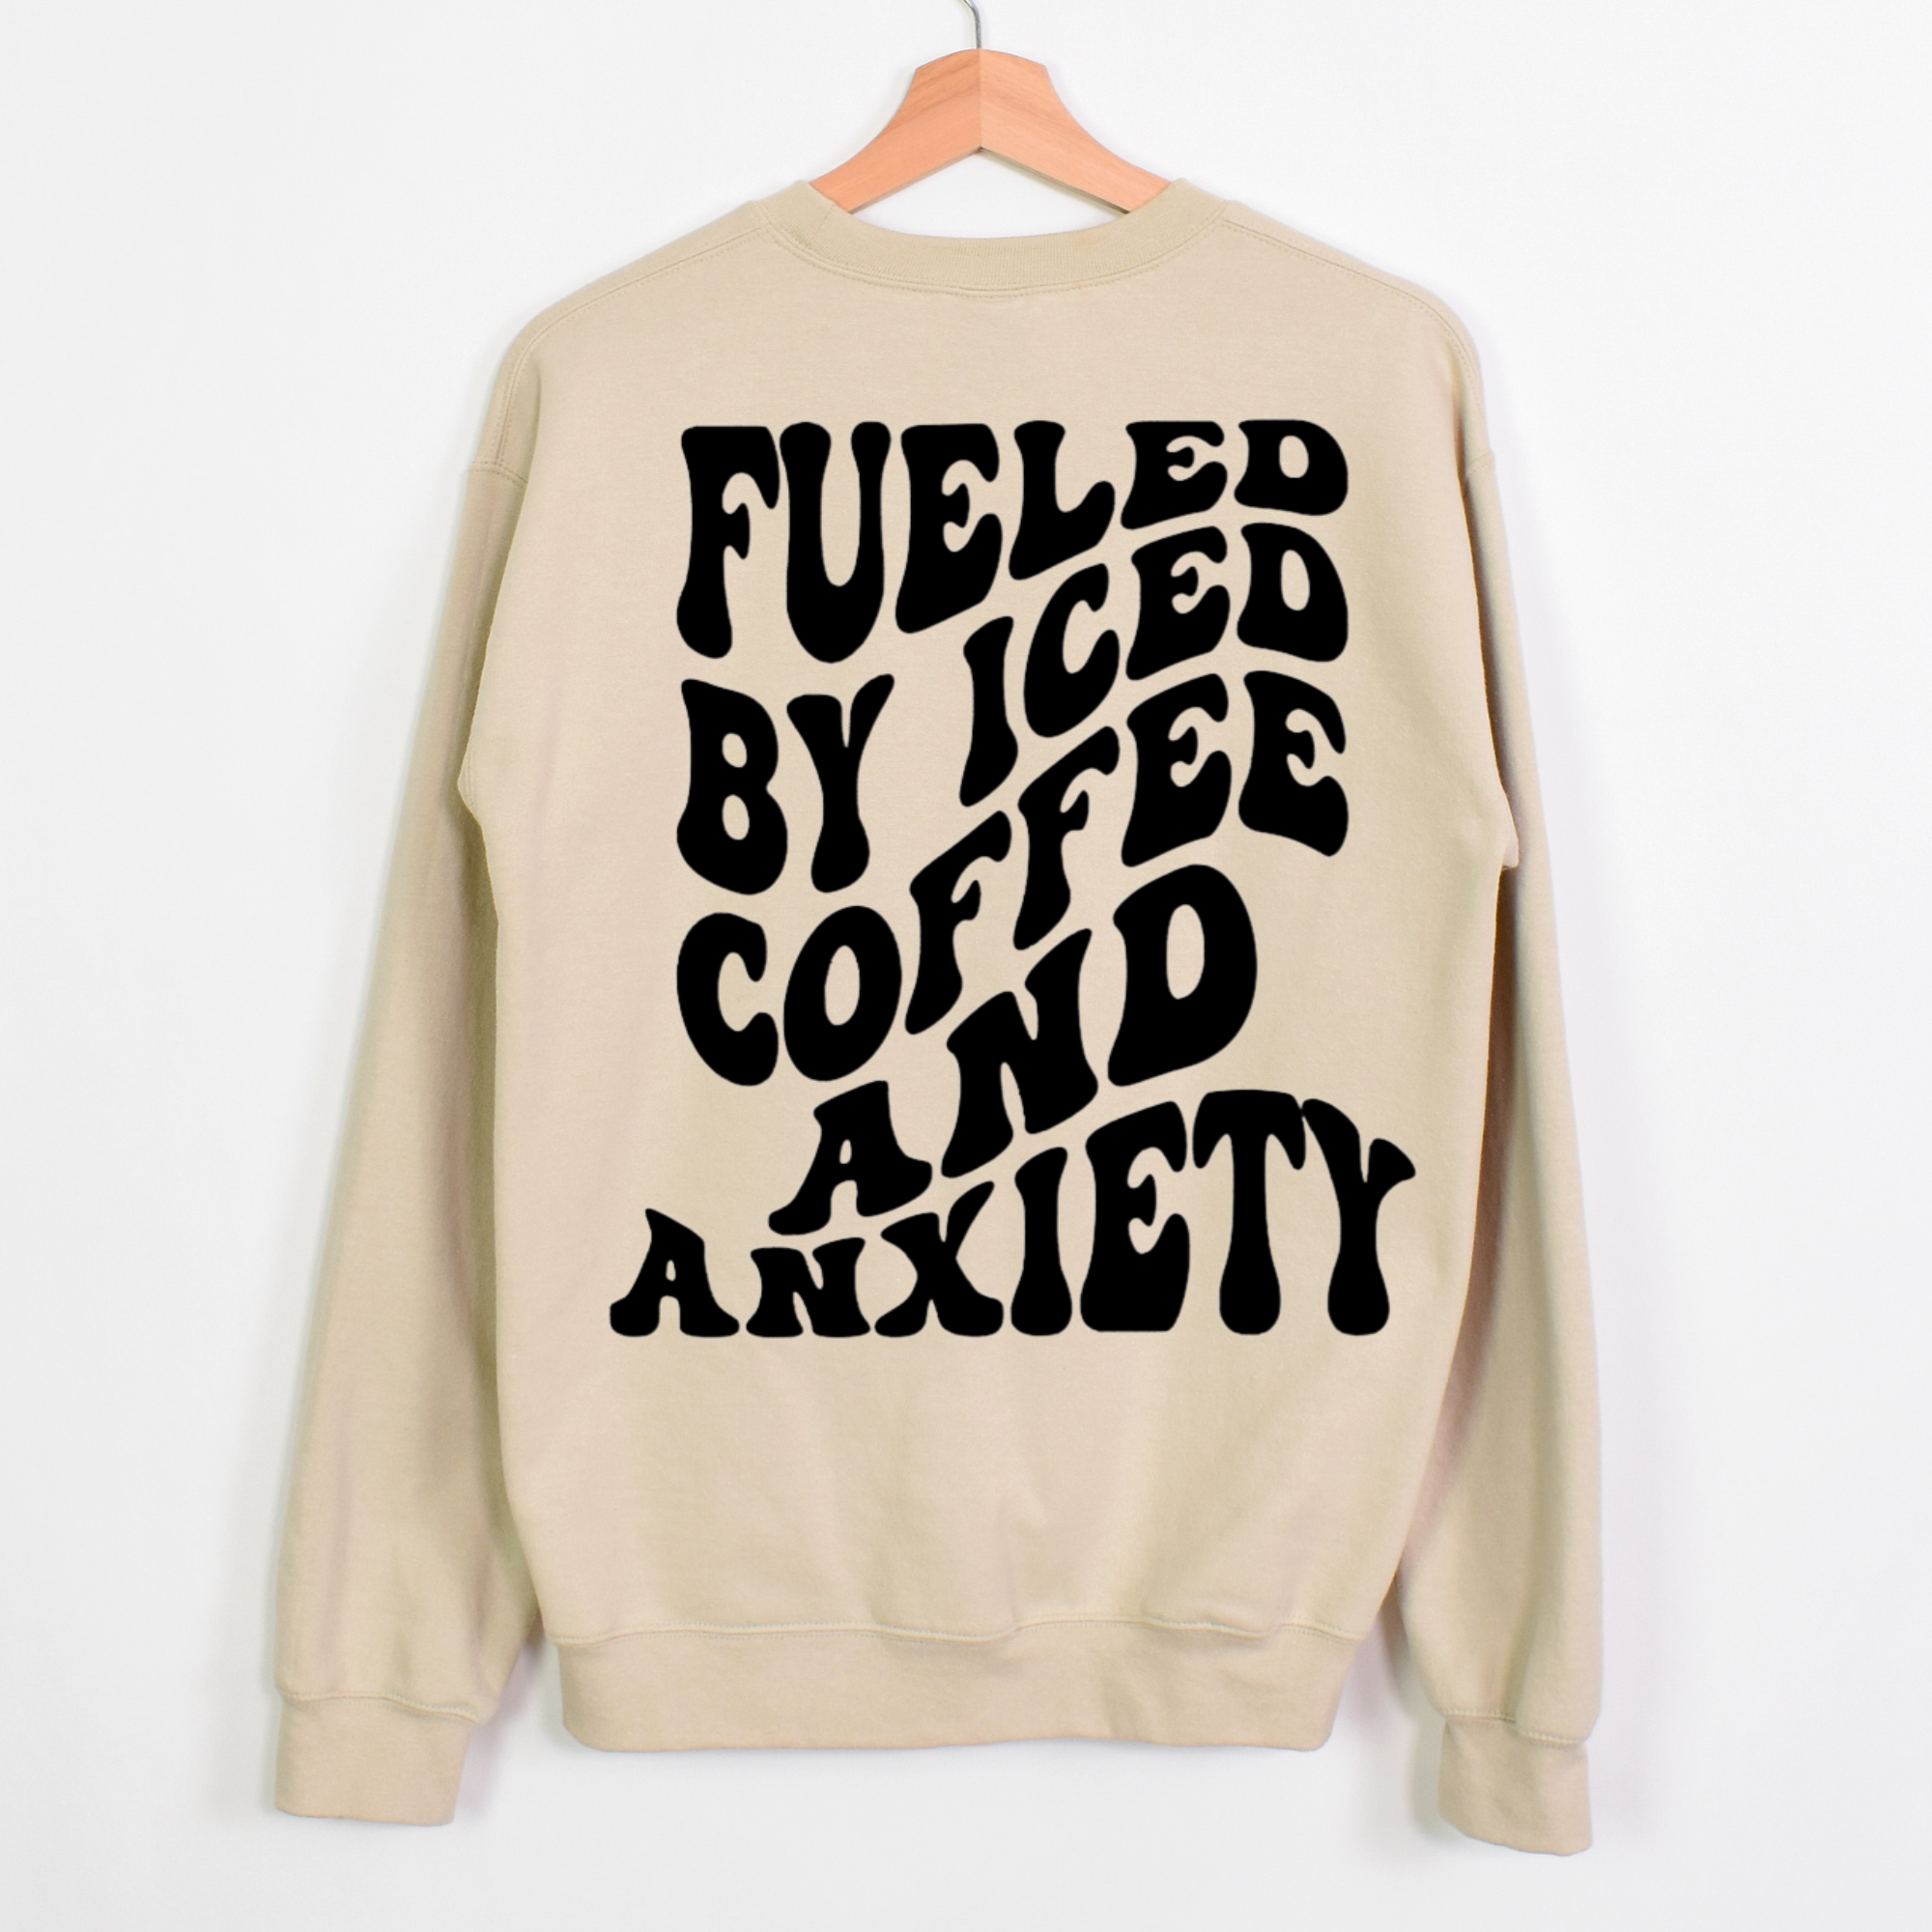 Fueled By Iced Coffee and Anxiety Shirt